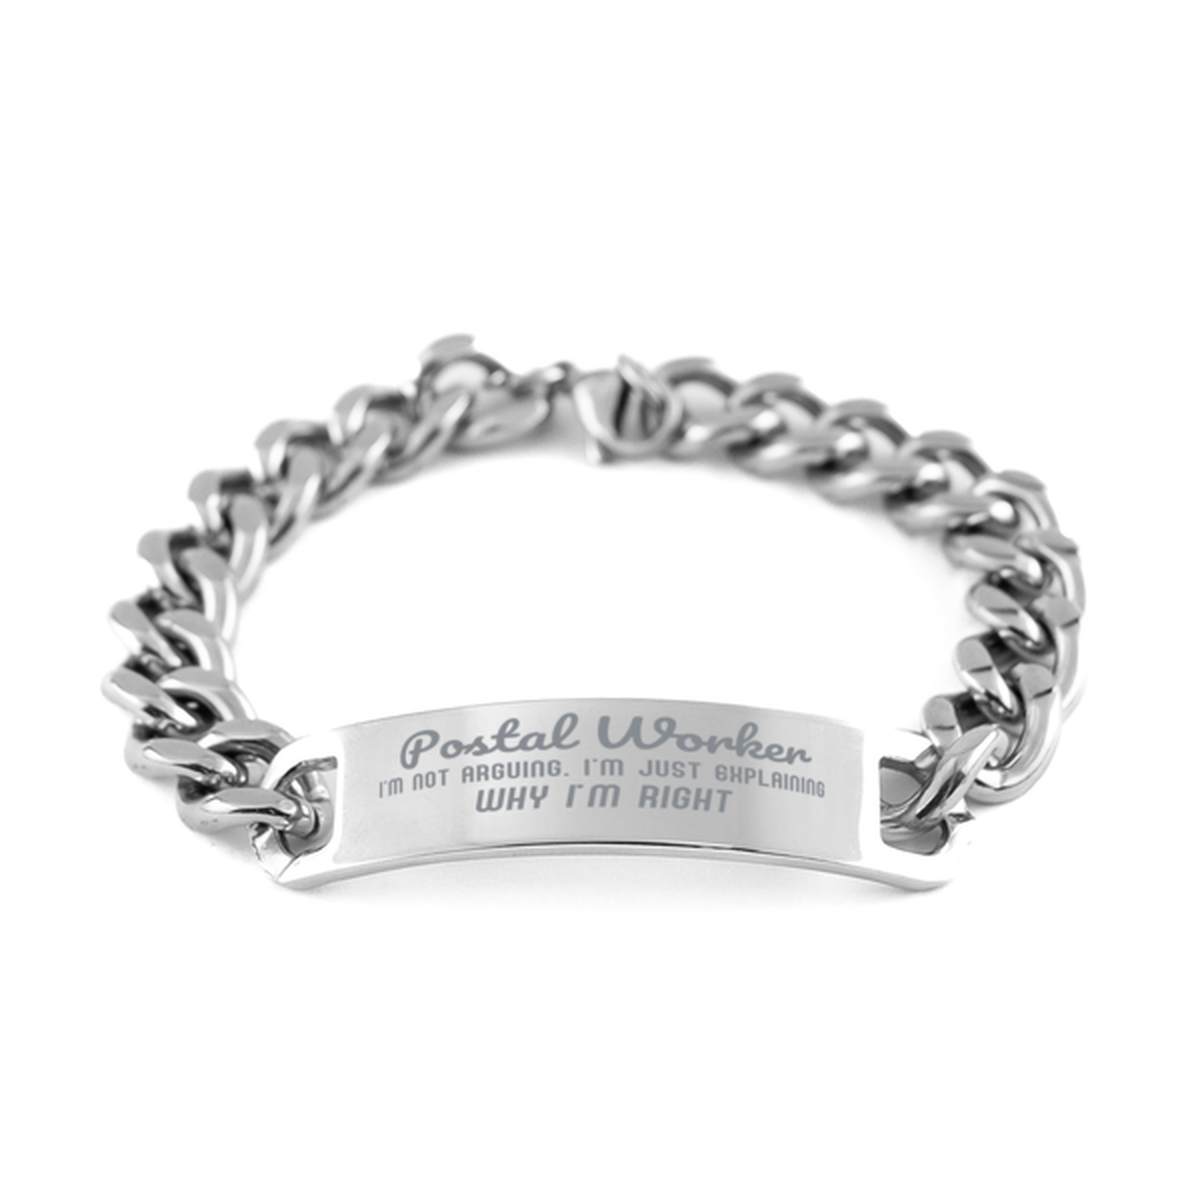 Postal Worker I'm not Arguing. I'm Just Explaining Why I'm RIGHT Cuban Chain Stainless Steel Bracelet, Graduation Birthday Christmas Postal Worker Gifts For Postal Worker Funny Saying Quote Present for Men Women Coworker